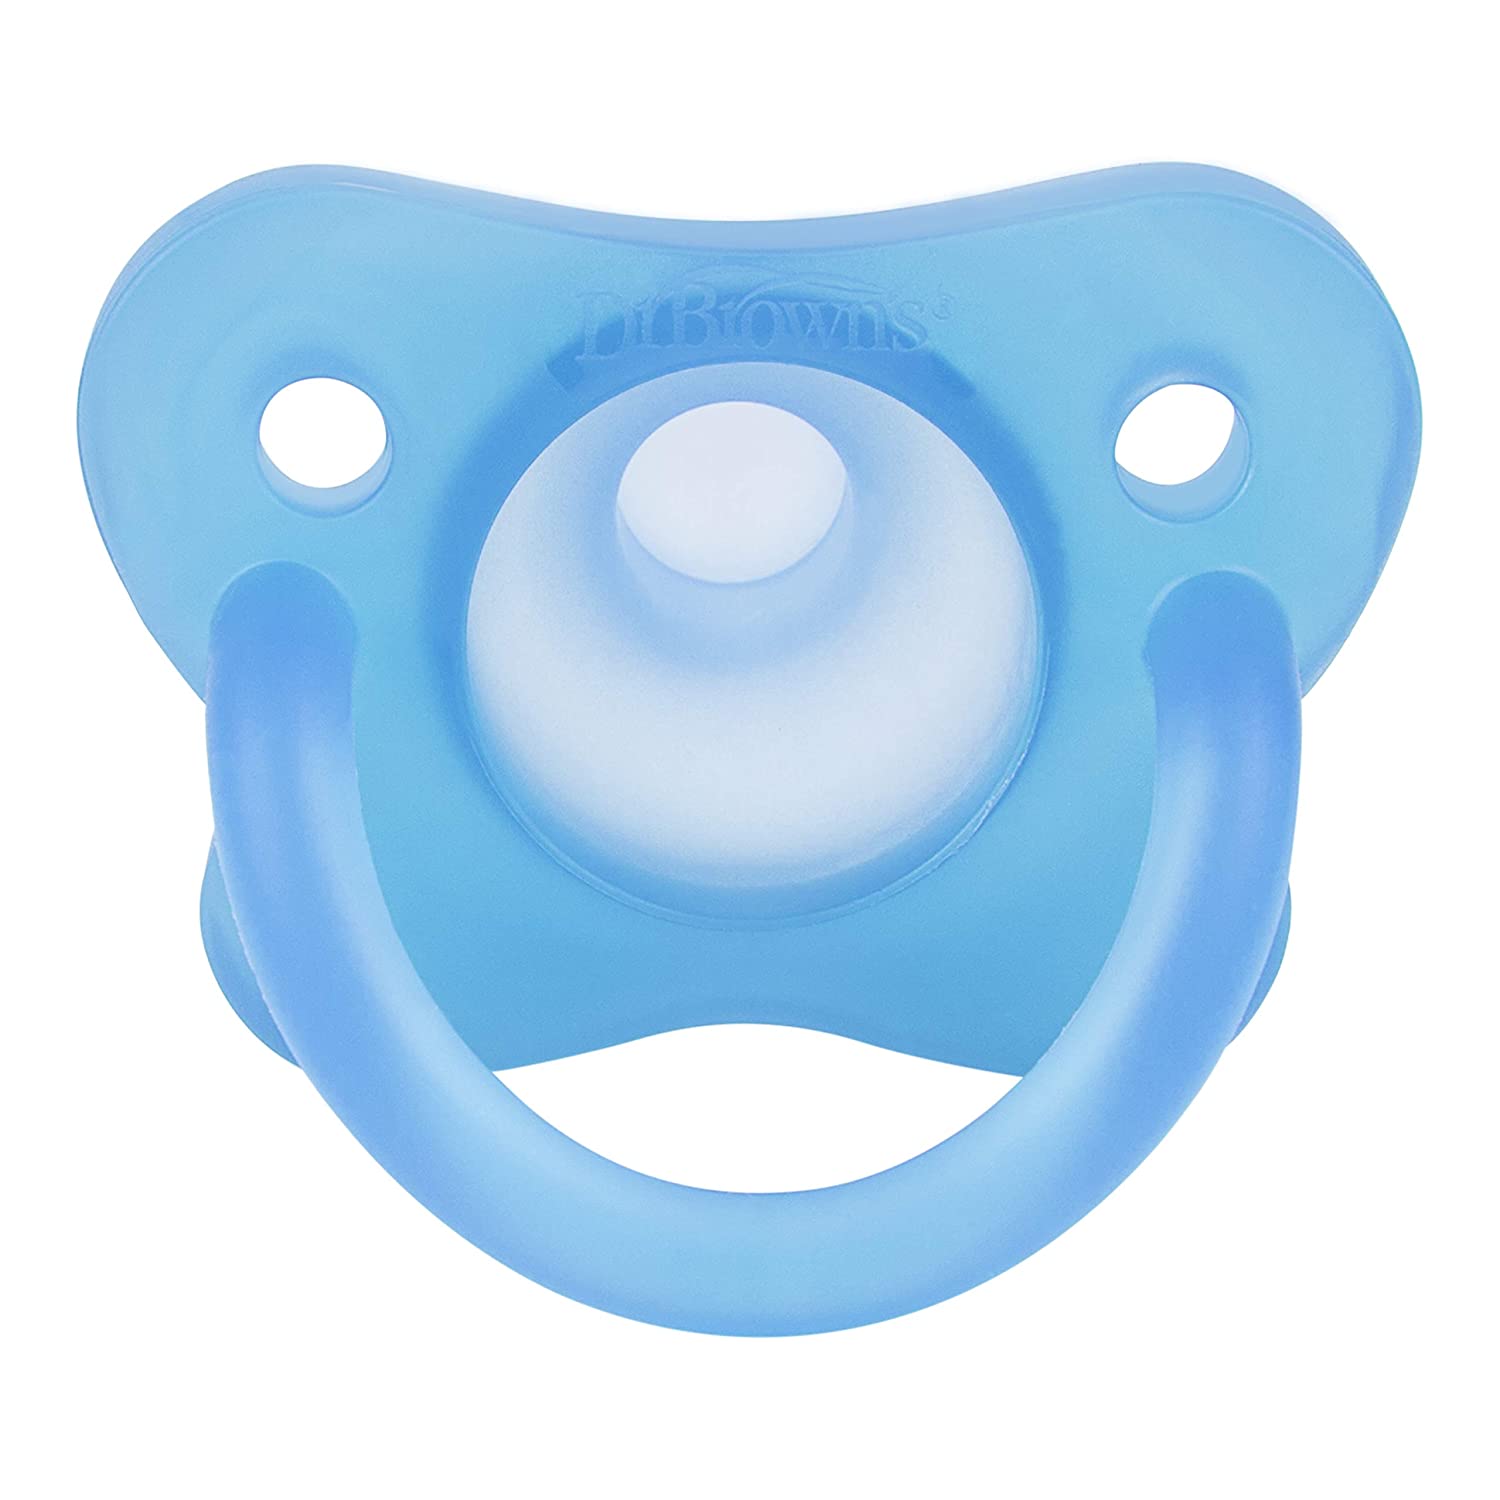 Dr. Browns Happy Pacifier Silicone Two-Piece Soother - Blue - DBPS12008-INTL